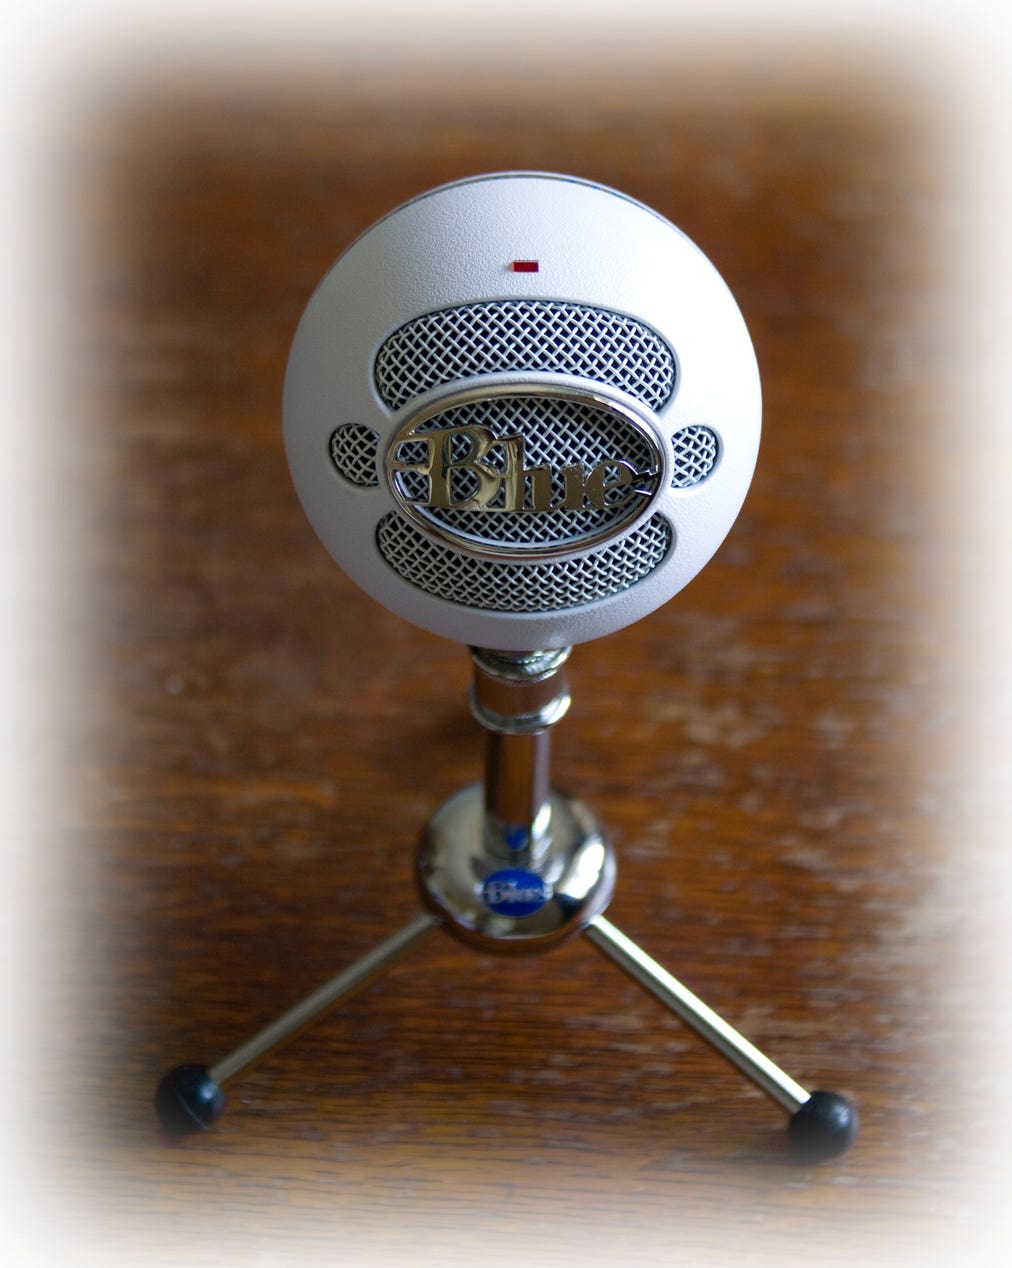 A microphone used for recording speech.